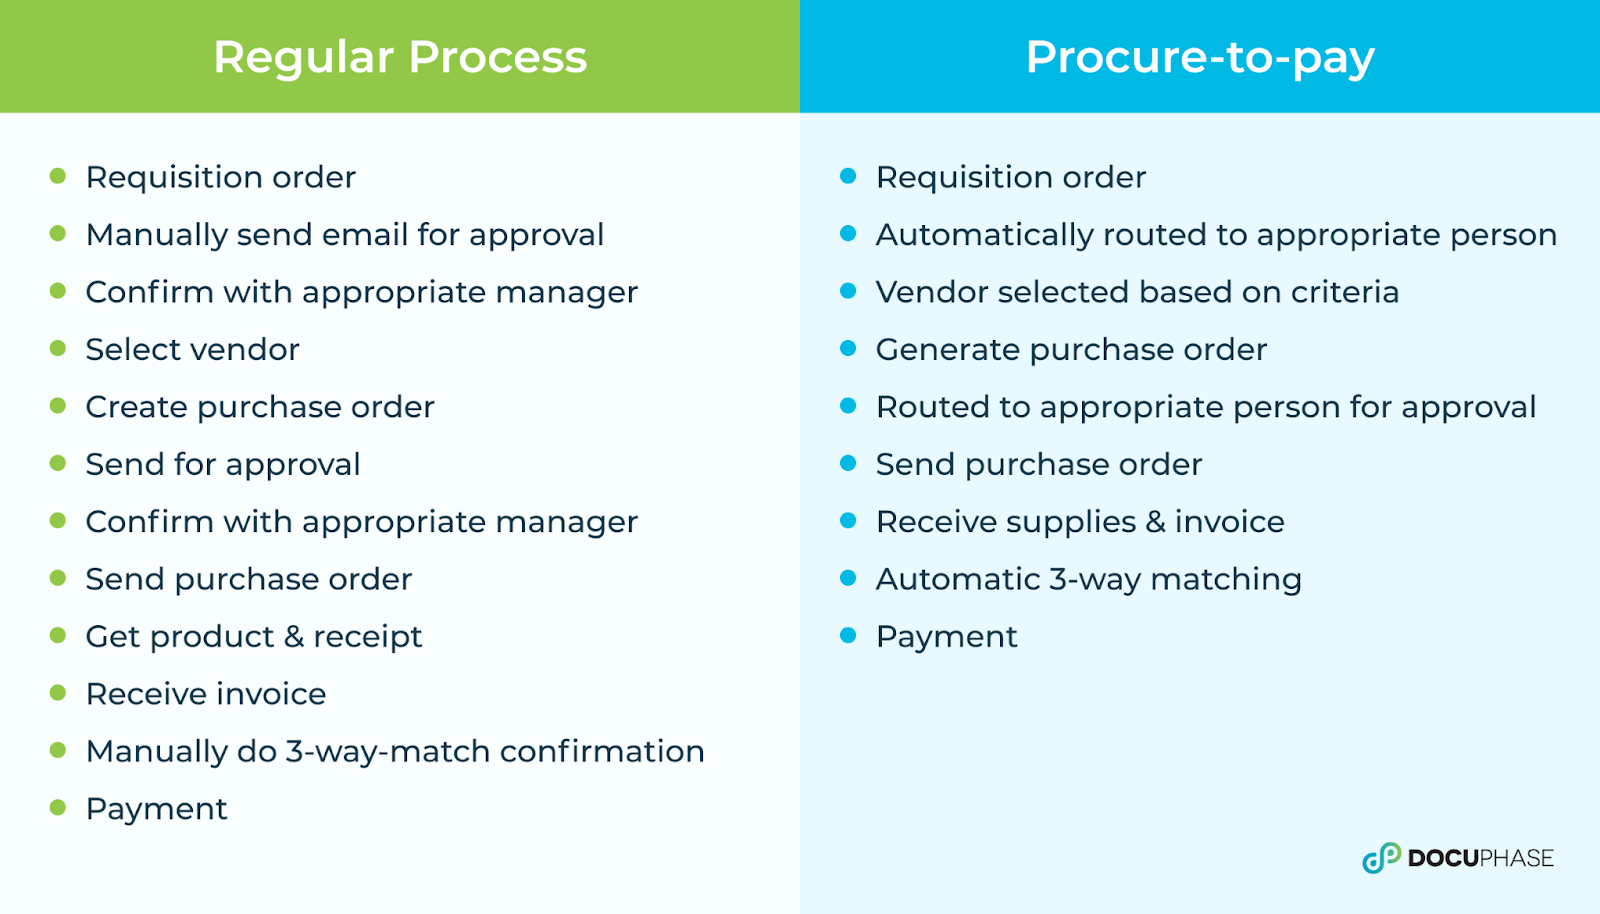 The difference with a procure-to-pay process